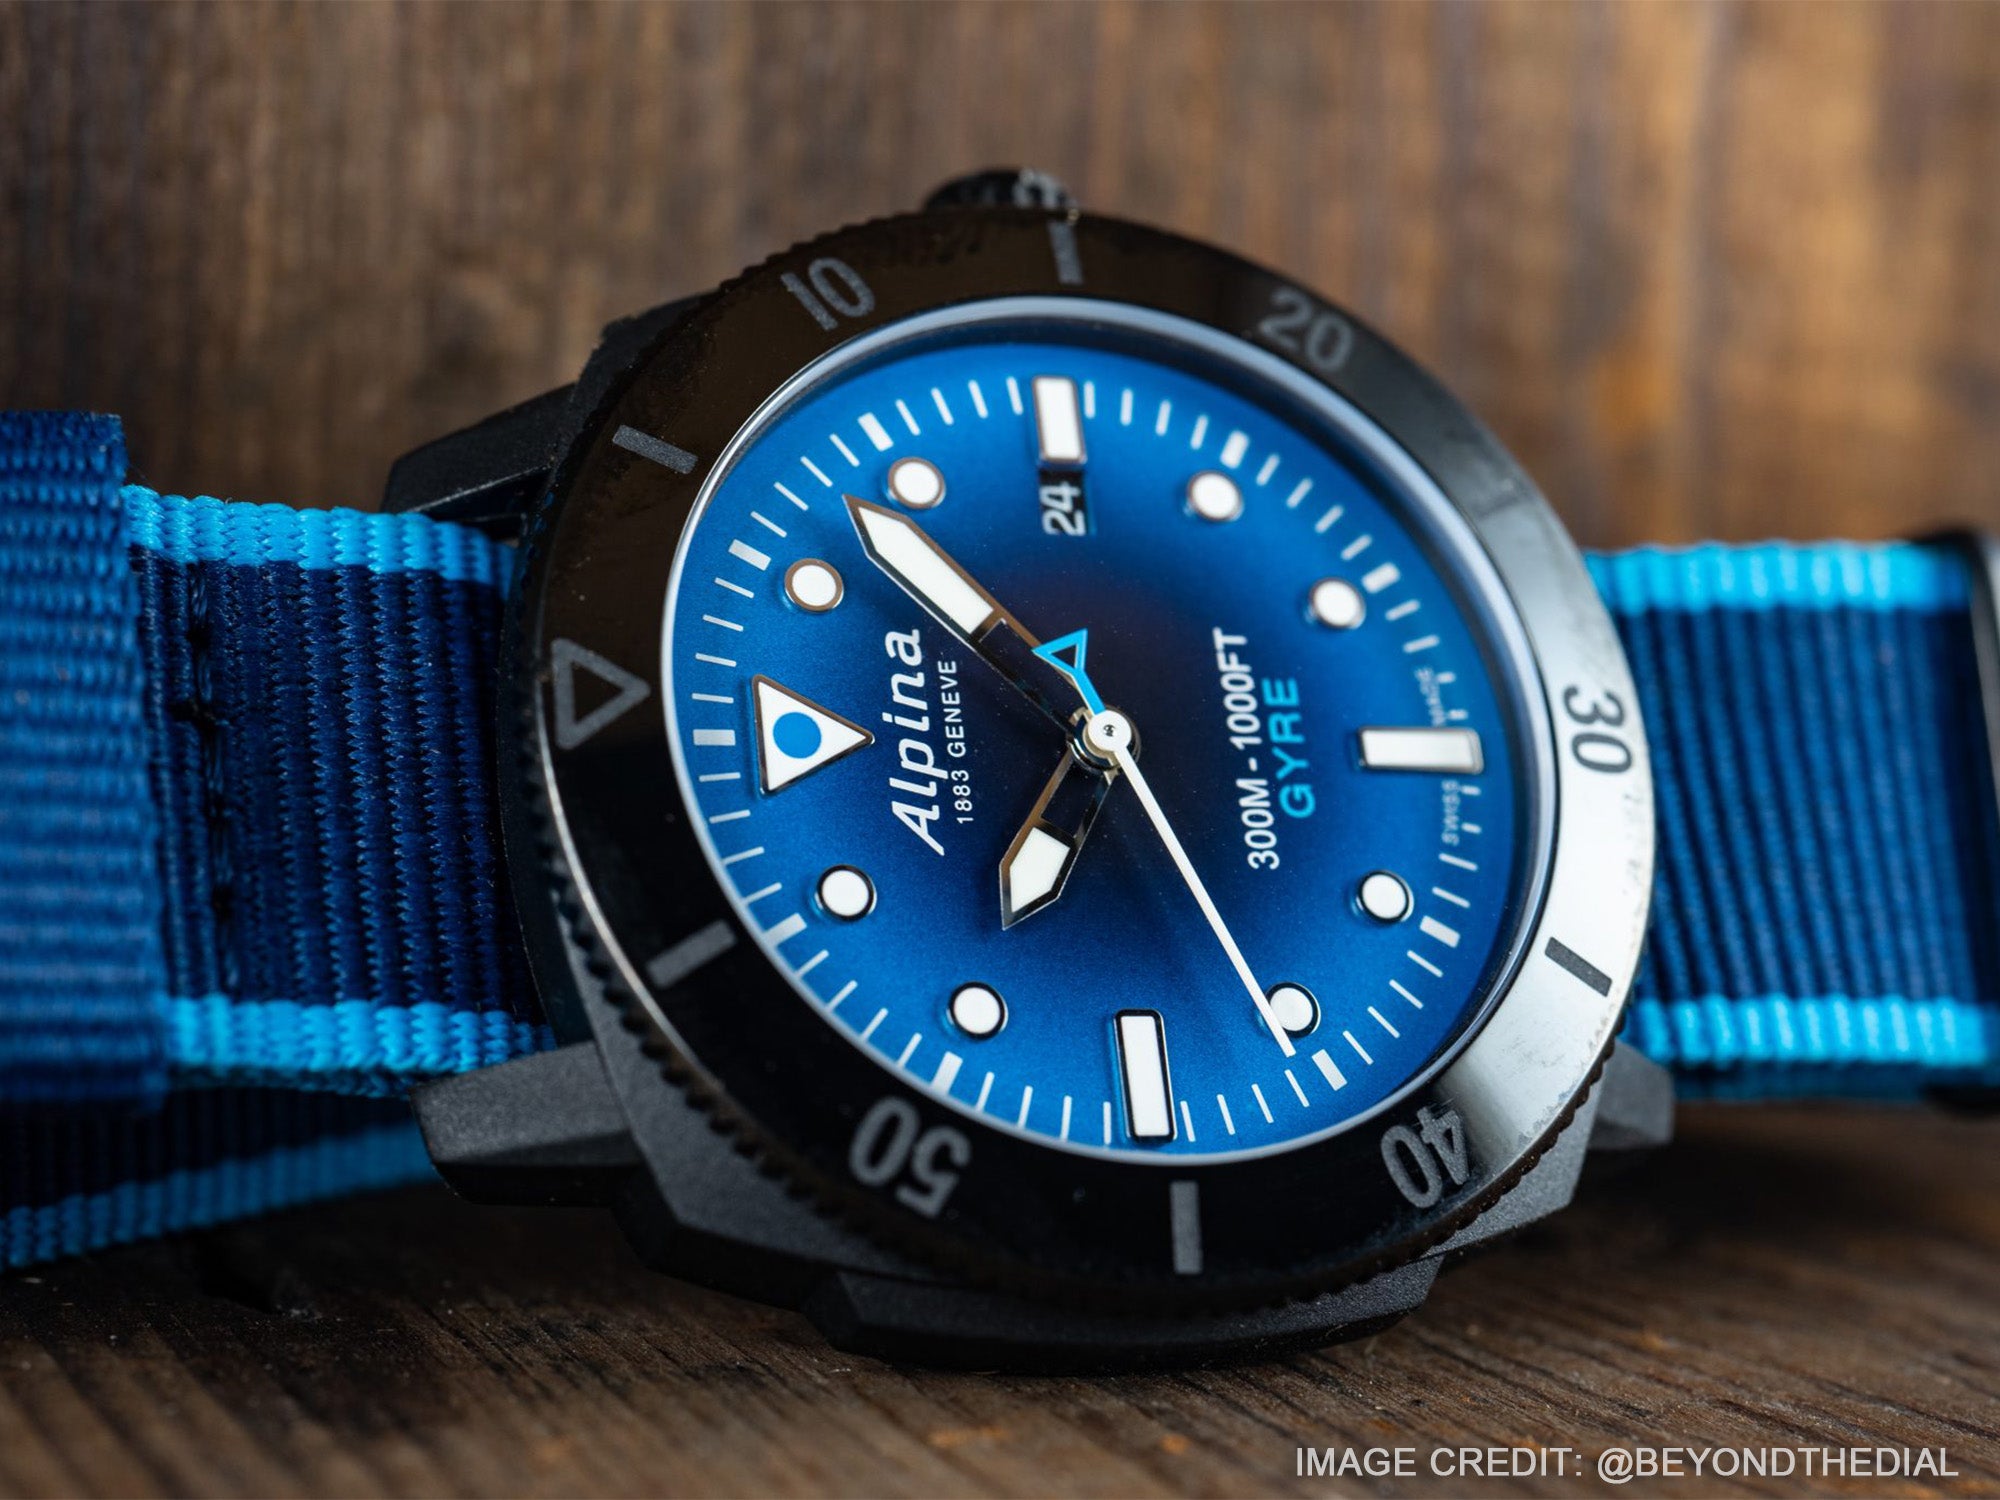 Alpina Seastrong Gyre used solely recycled plastic from the ocean for their production